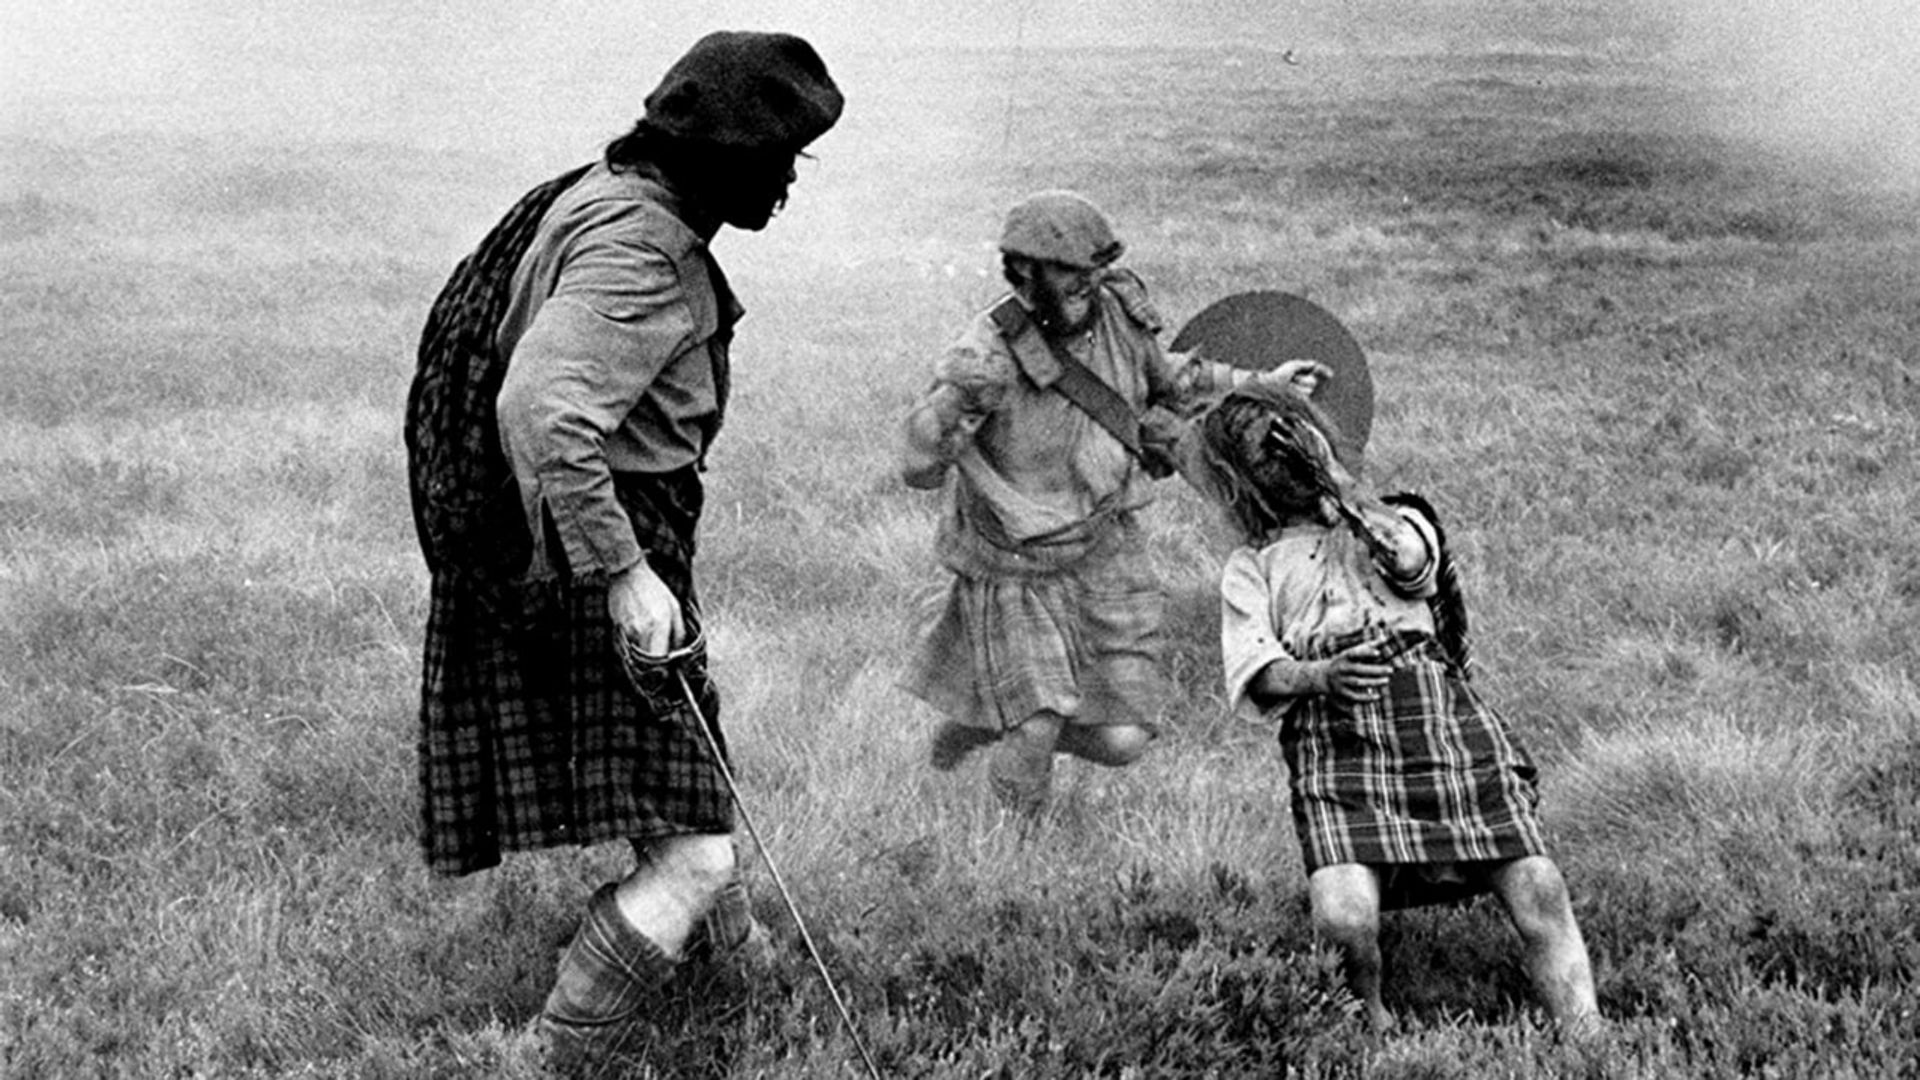 The Battle of Culloden background